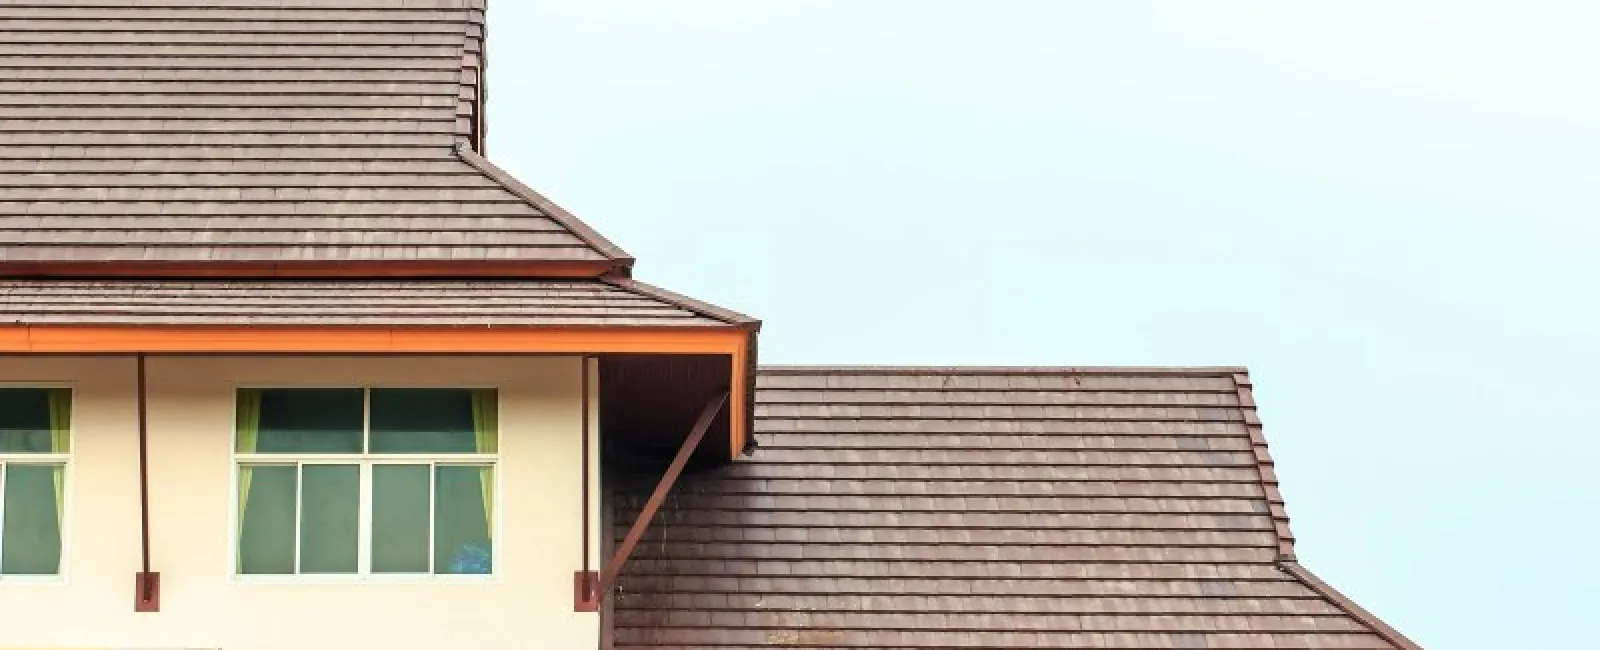 3 Durable Roofing Options for Your Home